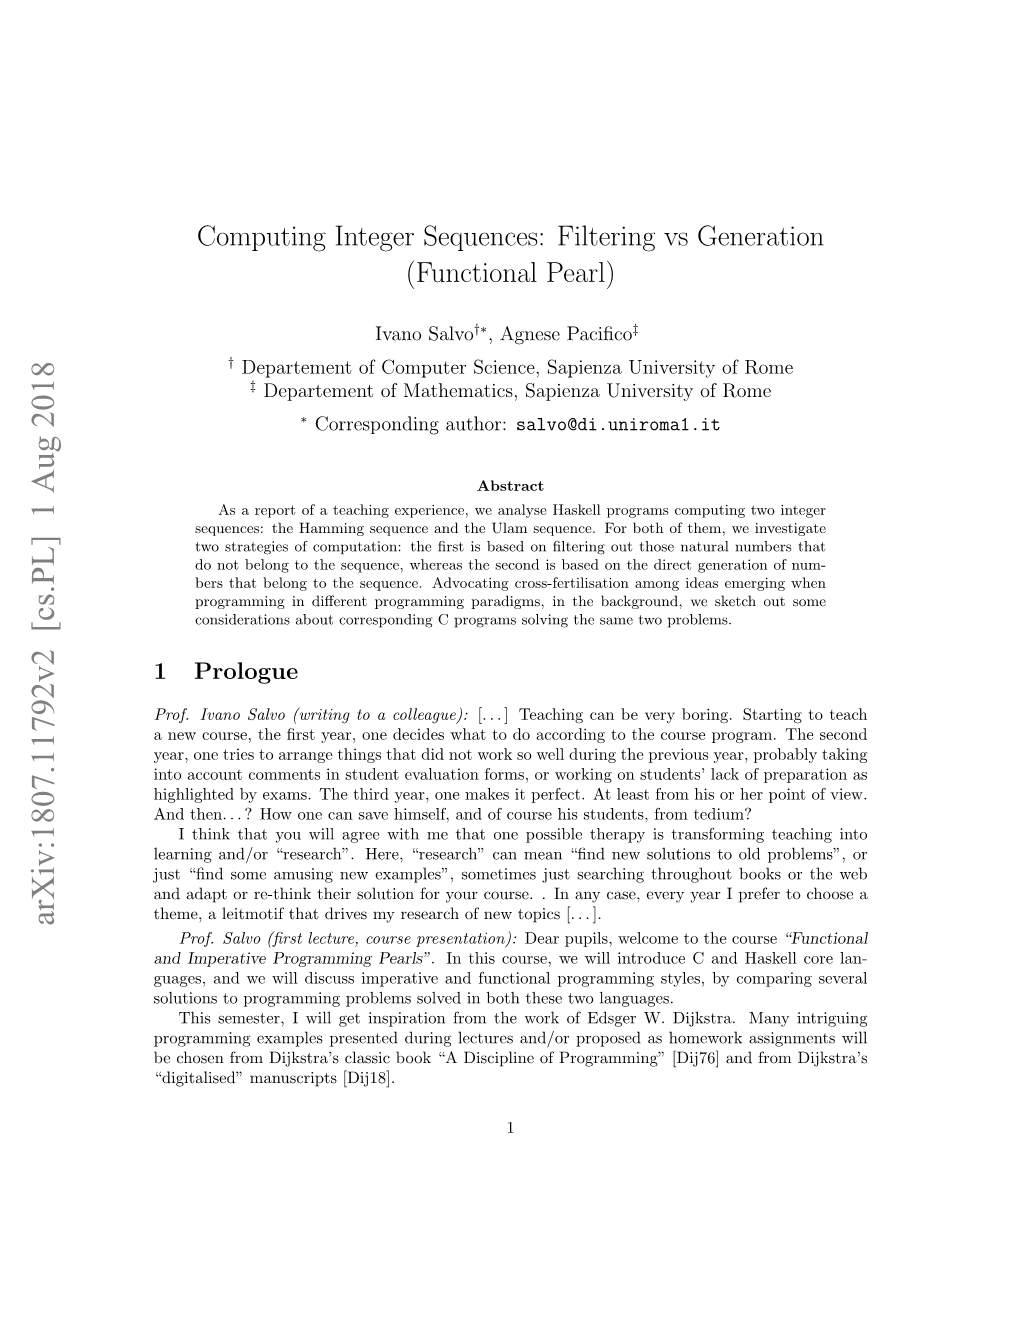 Computing Integer Sequences: Filtering Vs Generation (Functional Pearl)